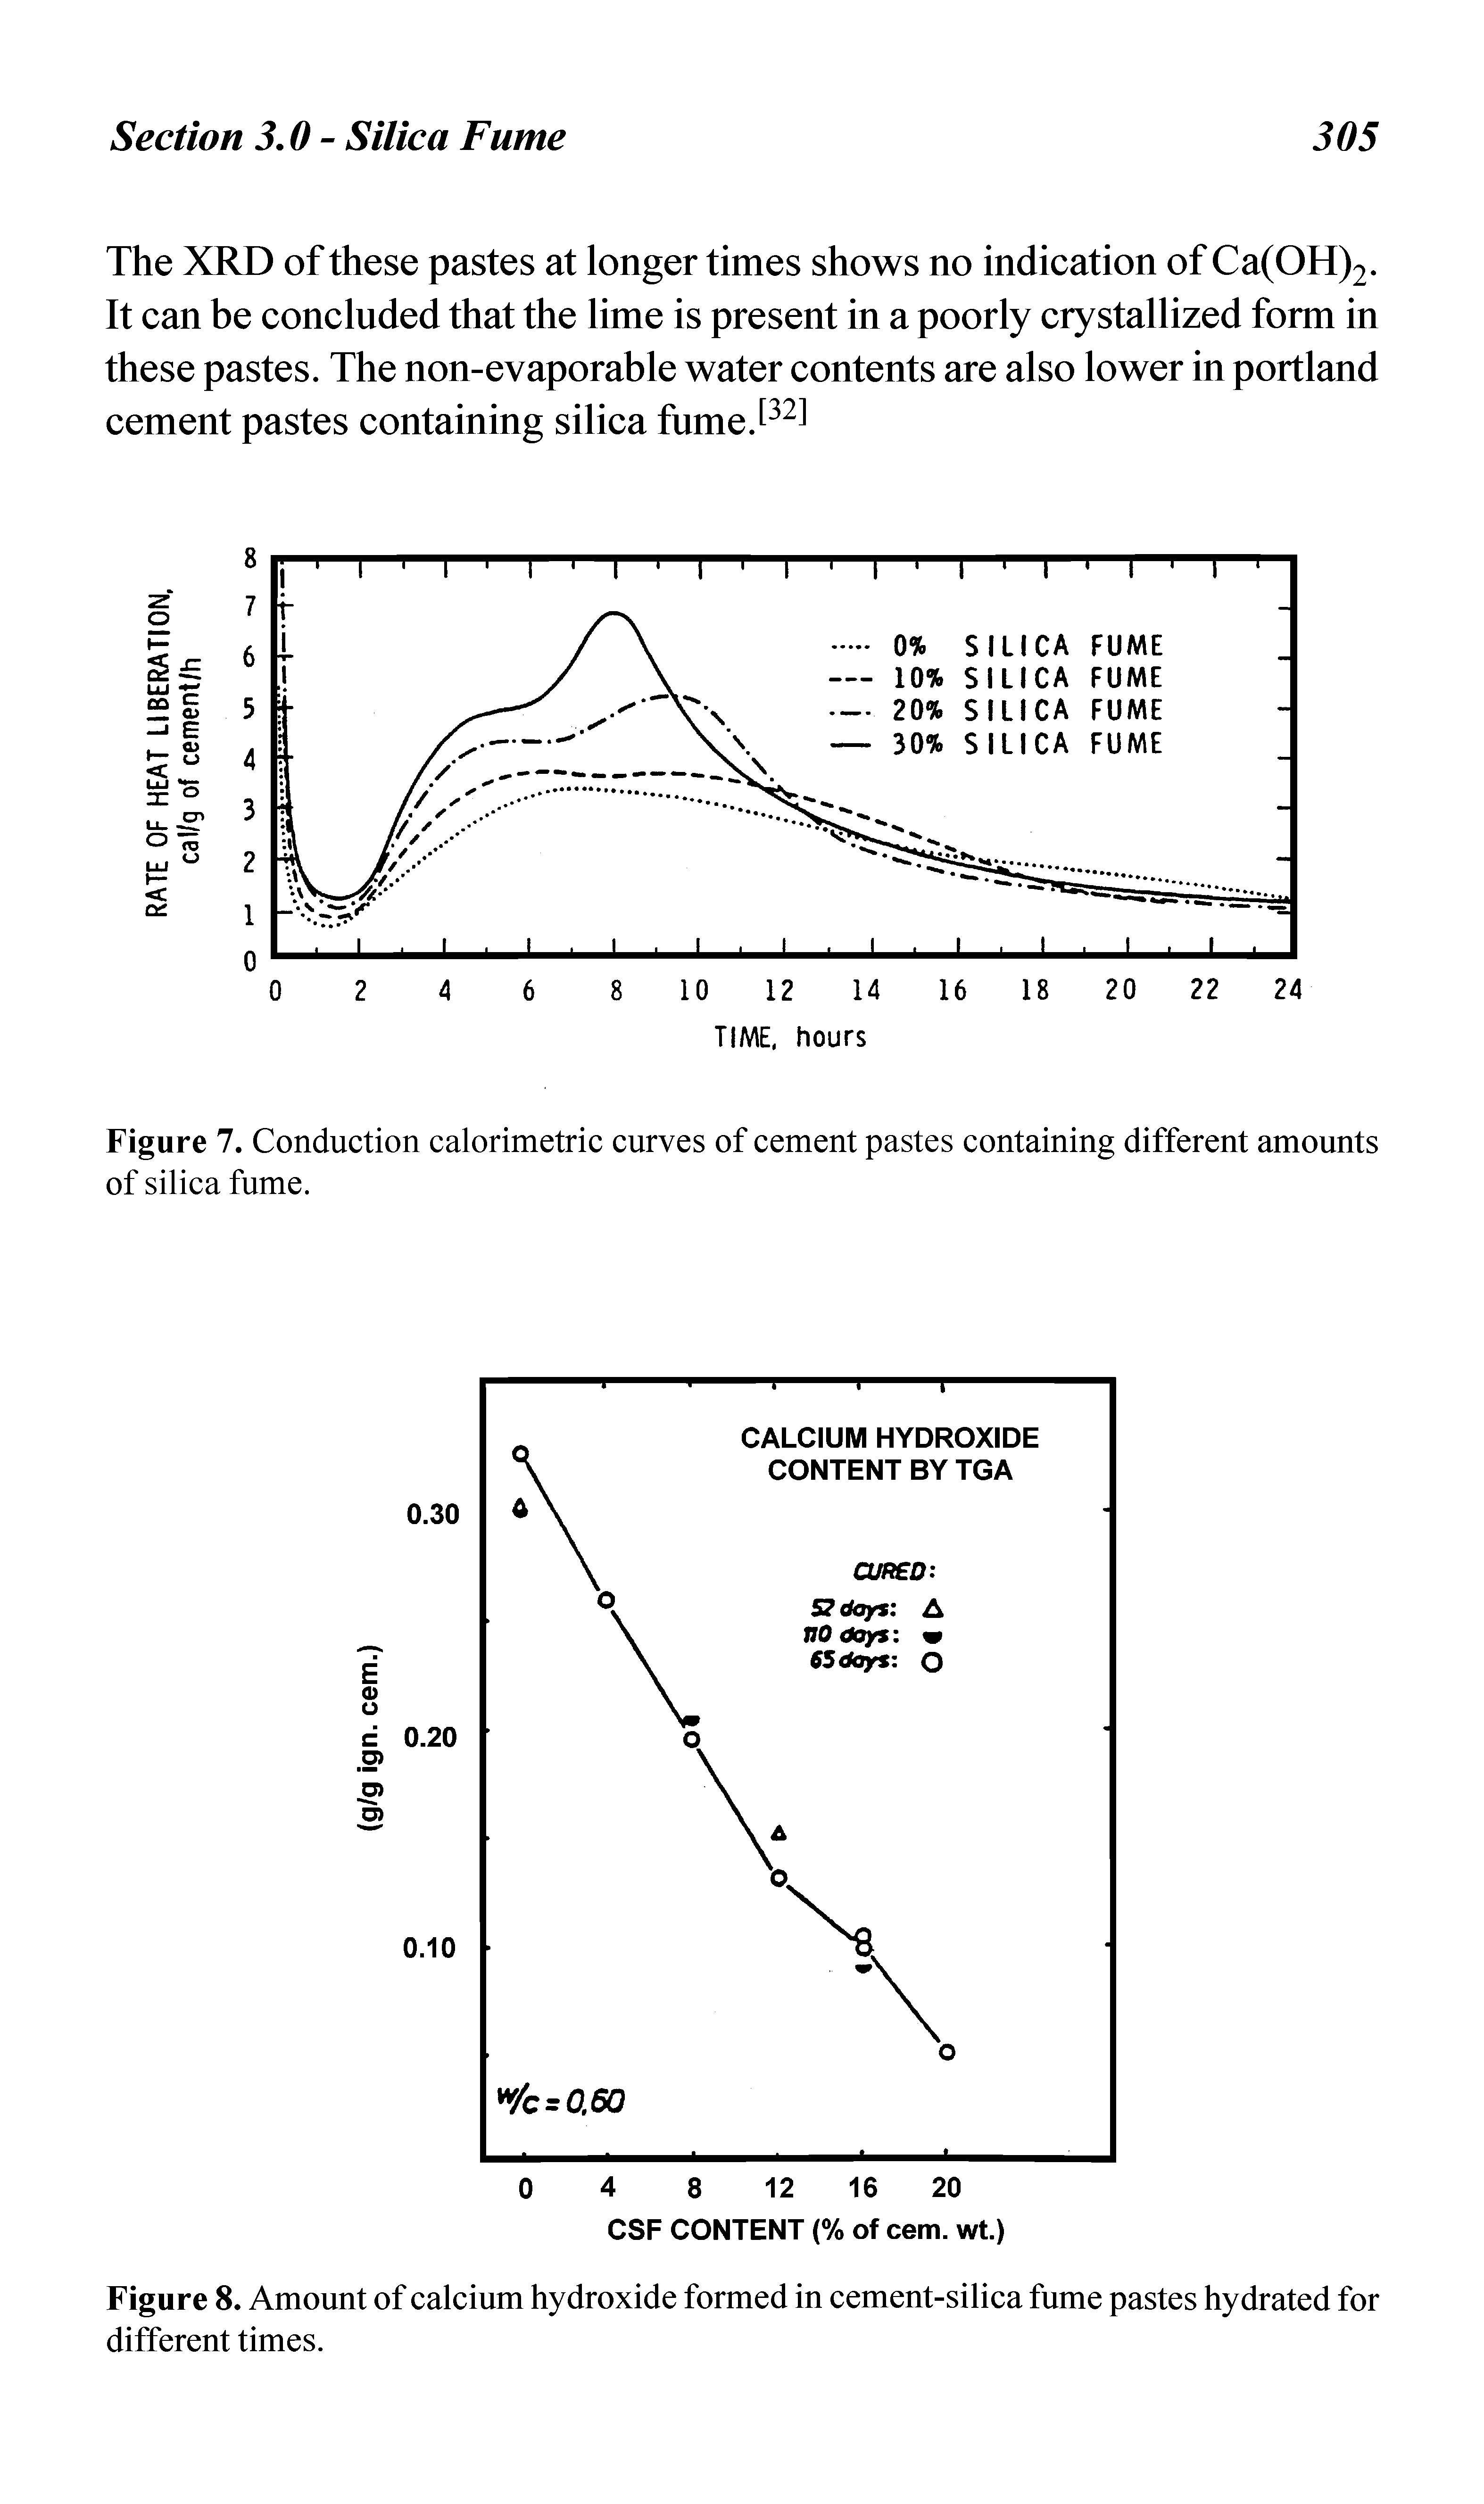 Figure 8. Amount of calcium hydroxide formed in cement-silica fume pastes hydrated for different times.